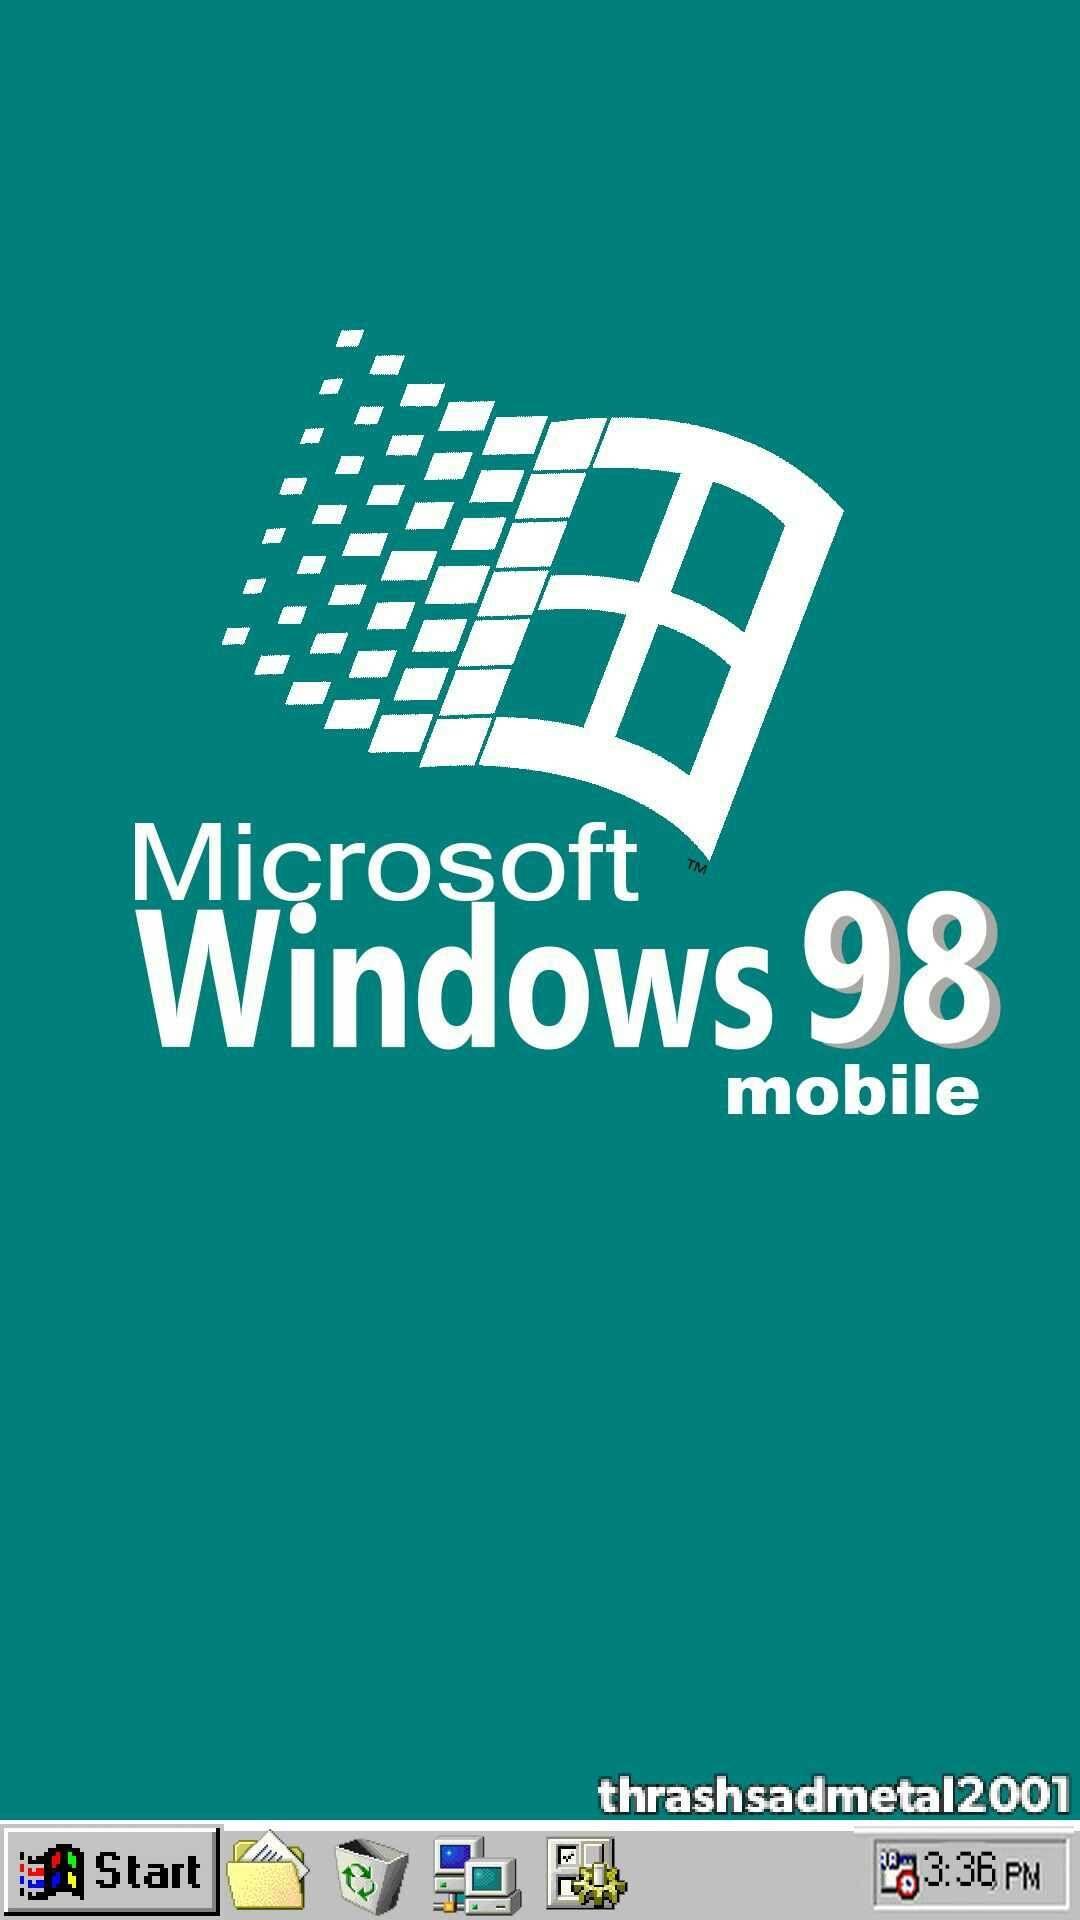 Windows 98 Wallpapers Top Free Windows 98 Backgrounds Wallpaperaccess